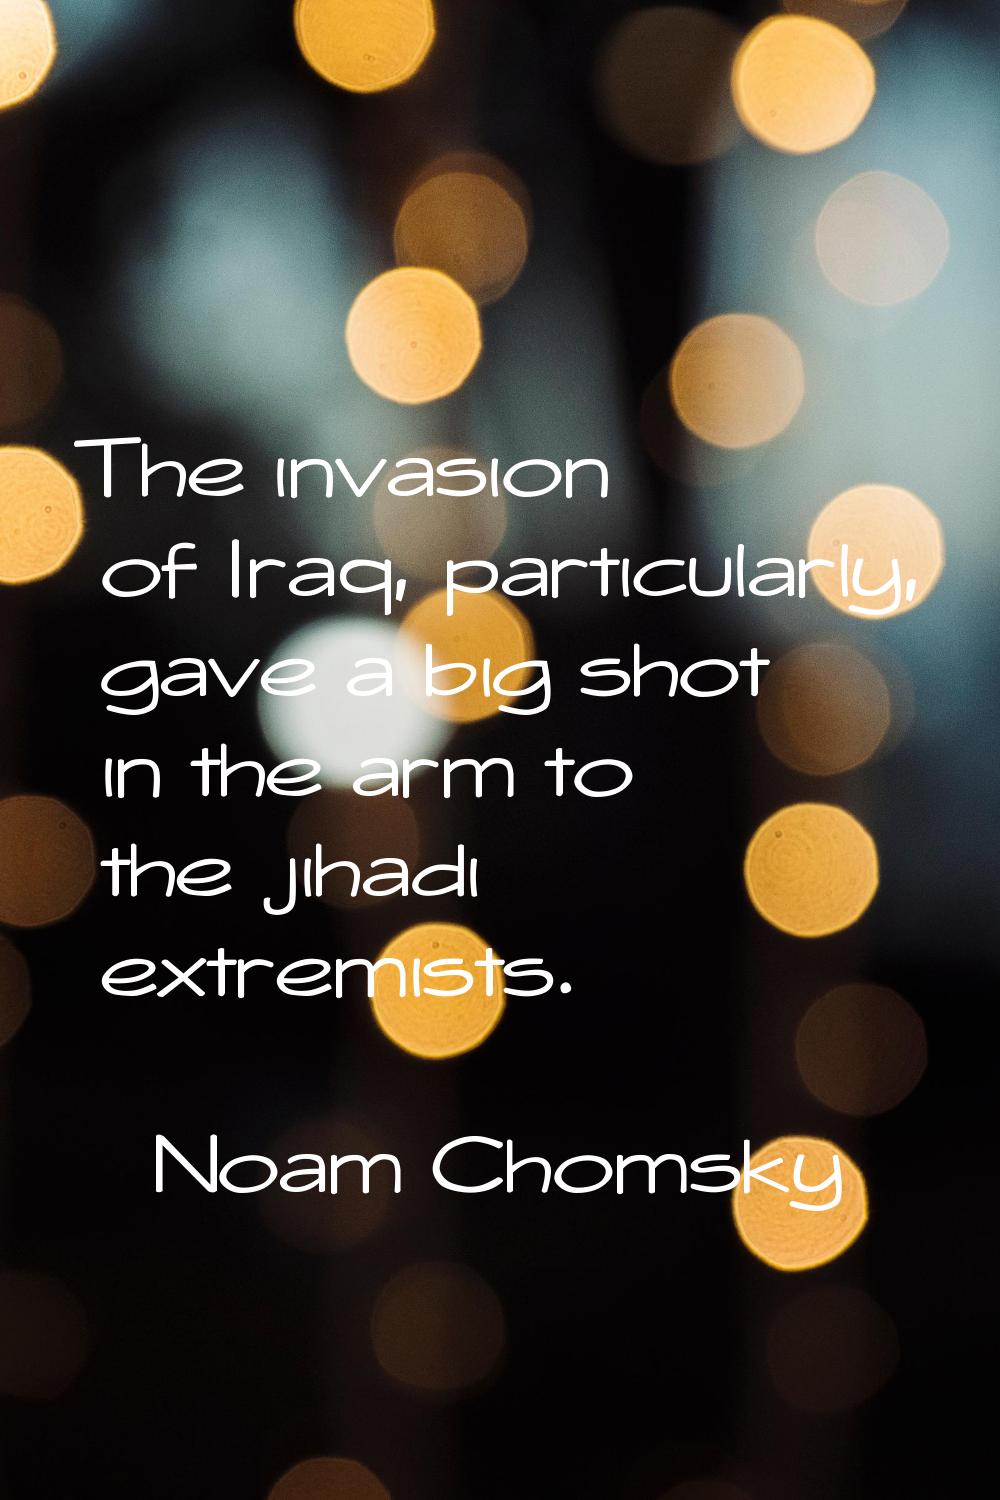 The invasion of Iraq, particularly, gave a big shot in the arm to the jihadi extremists.